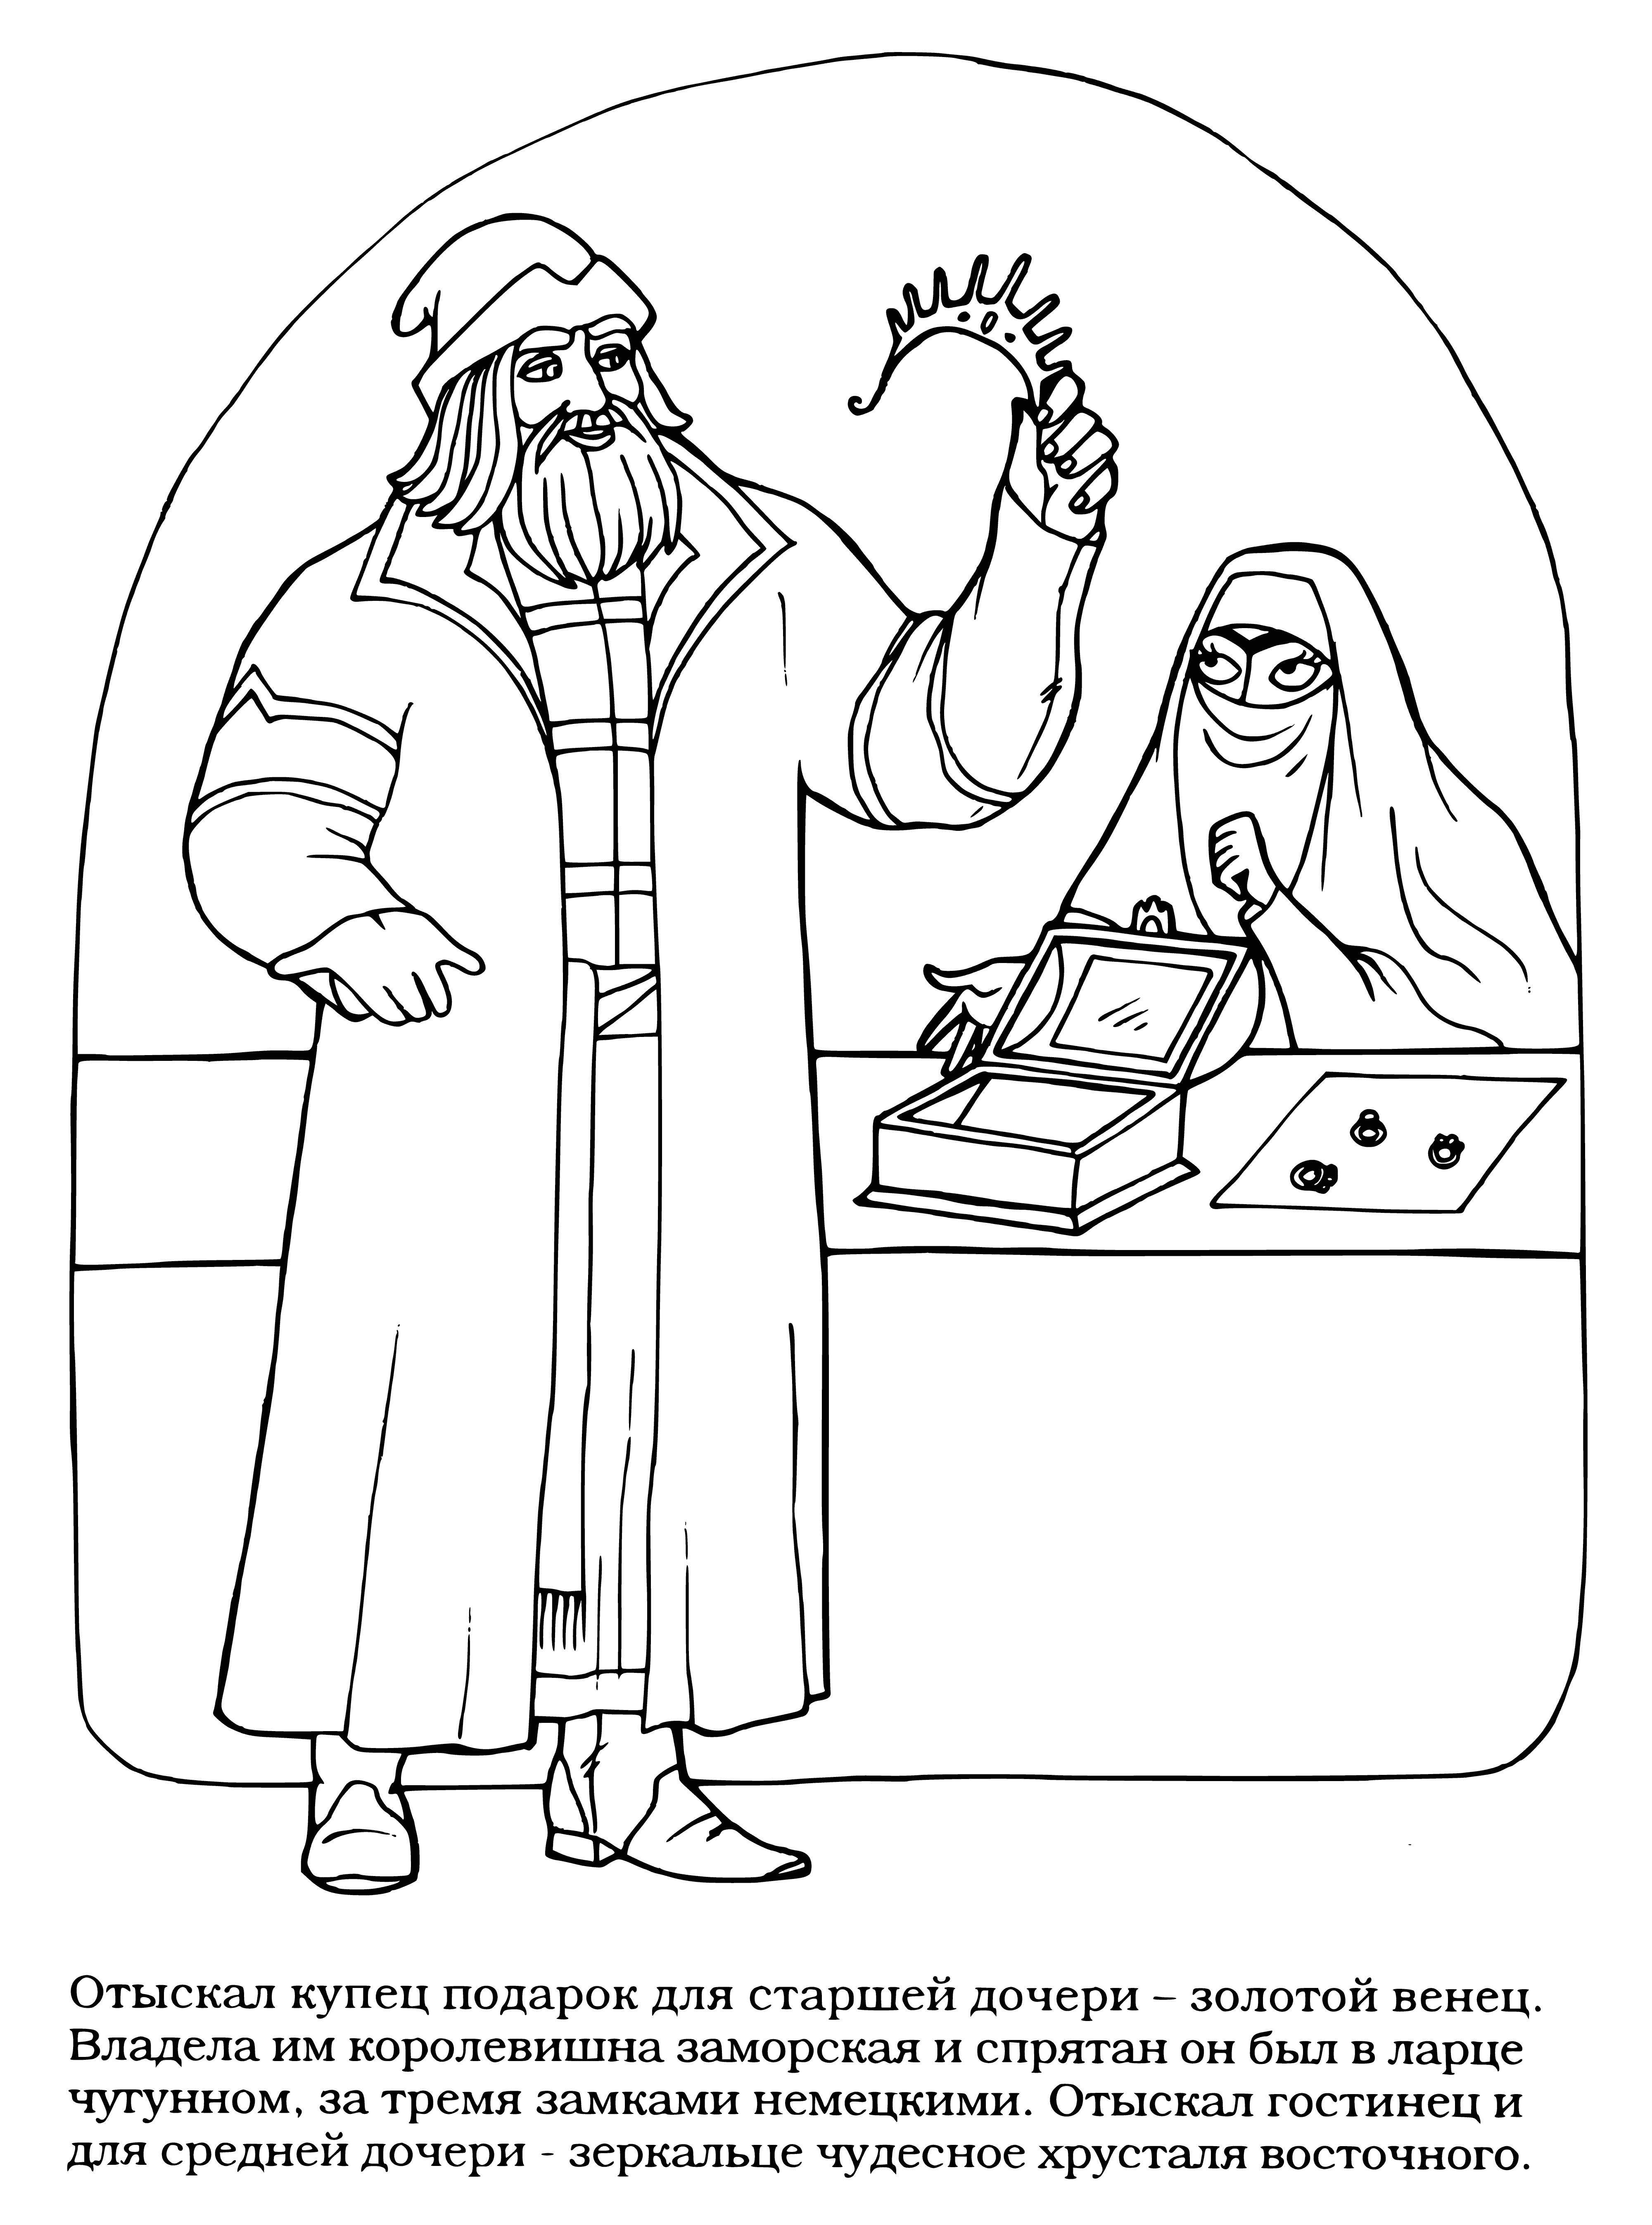 Gifts for sisters coloring page